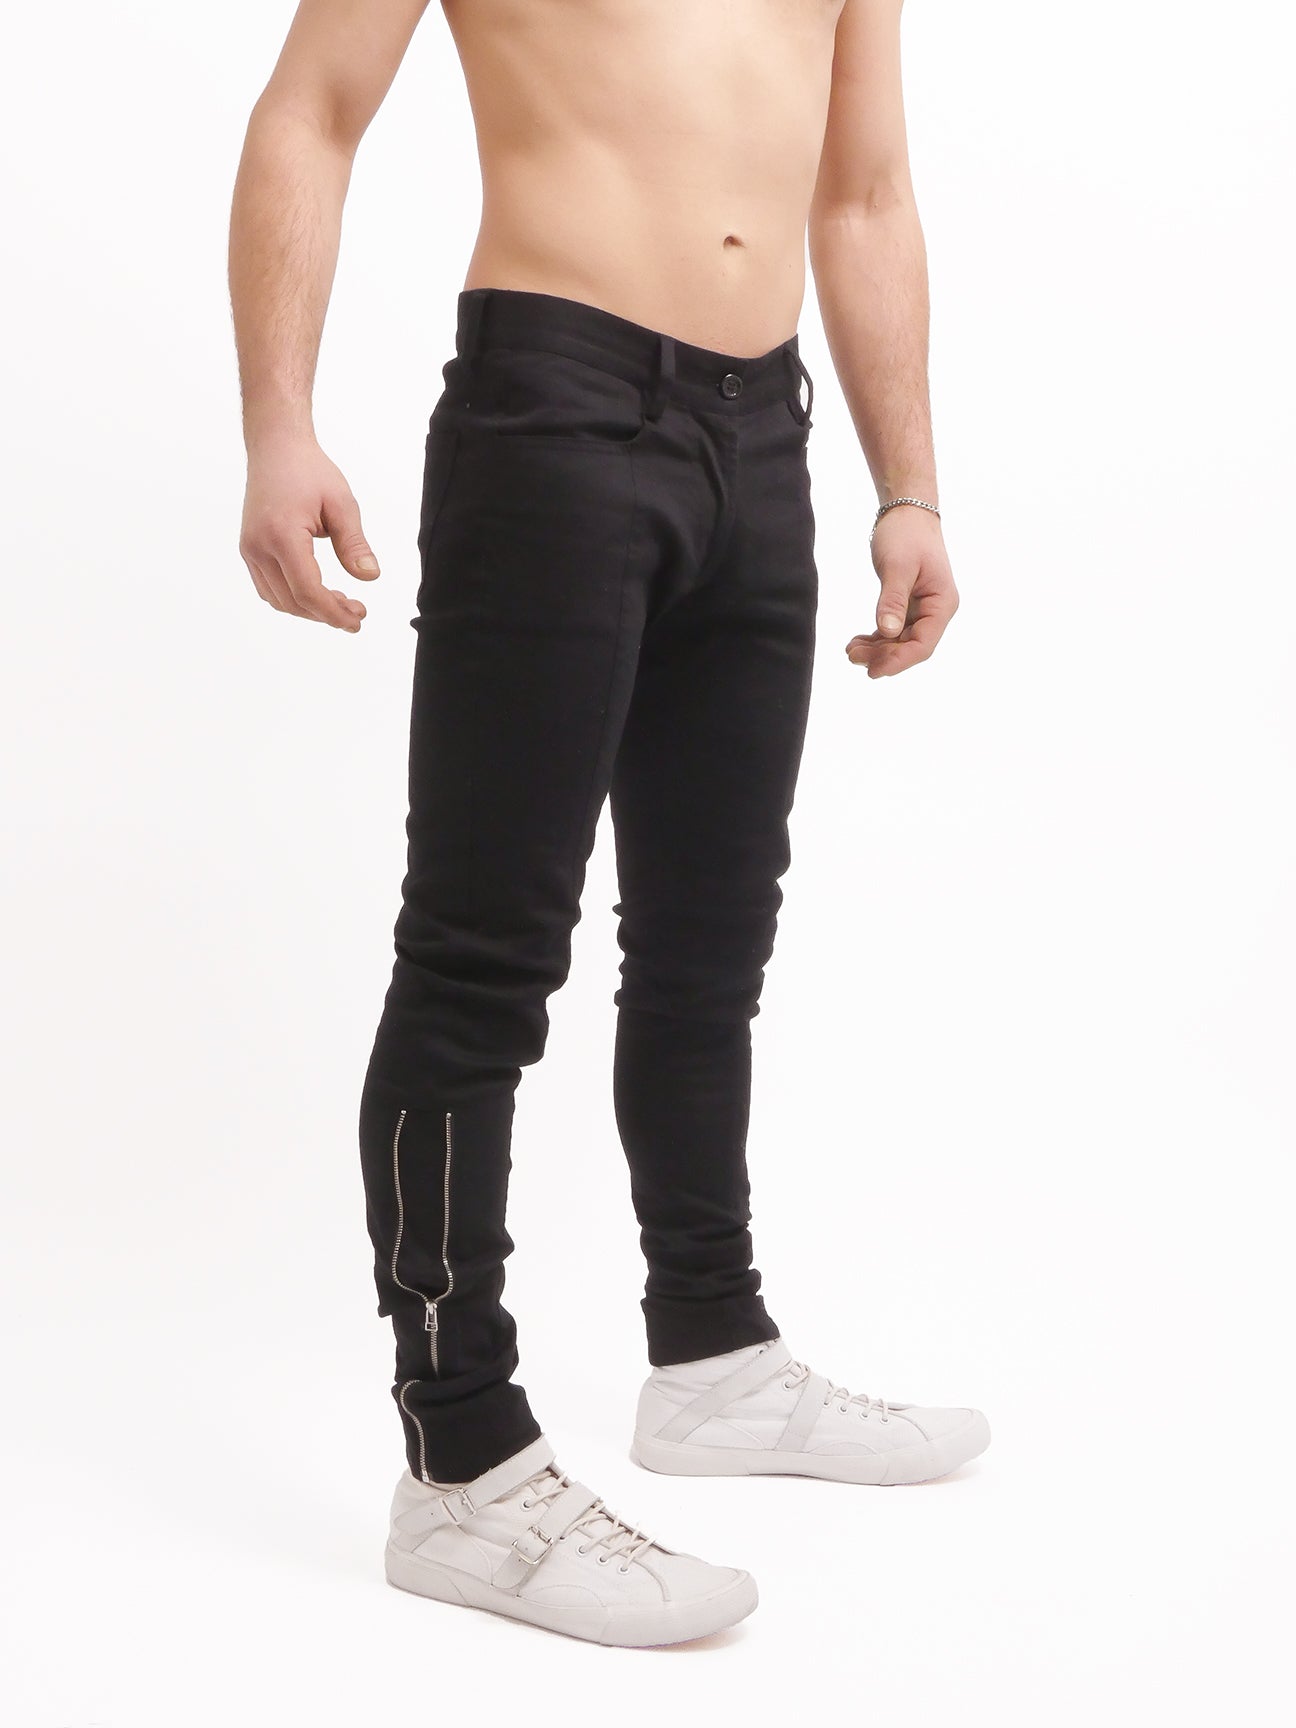 BLACK JEANS WITH SILVER ZIP DETAIL